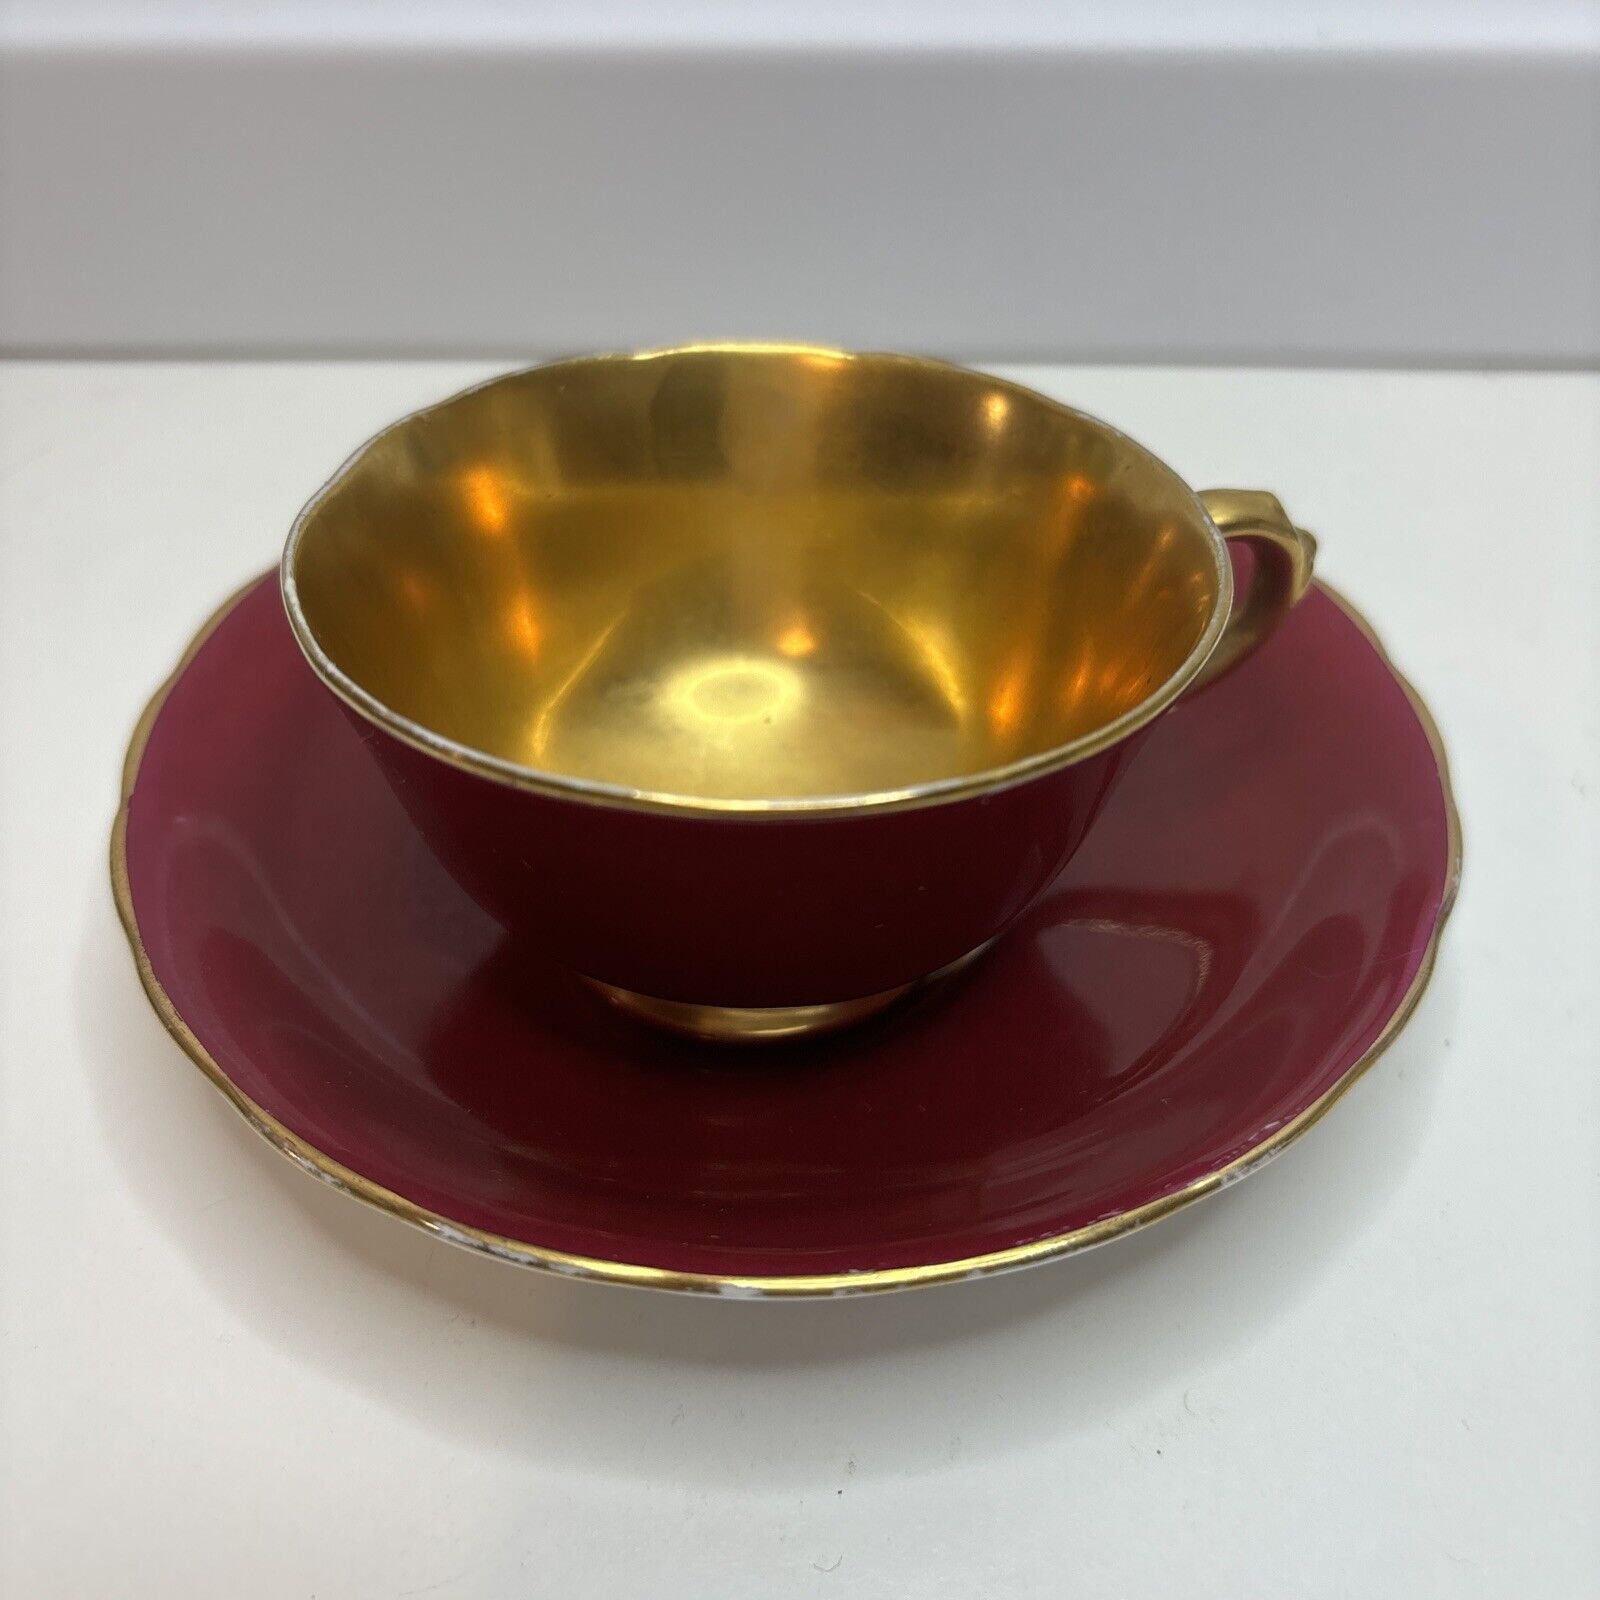 Tuscan Fine English Bone China Teacup Saucer Gold Inside Red Exterior